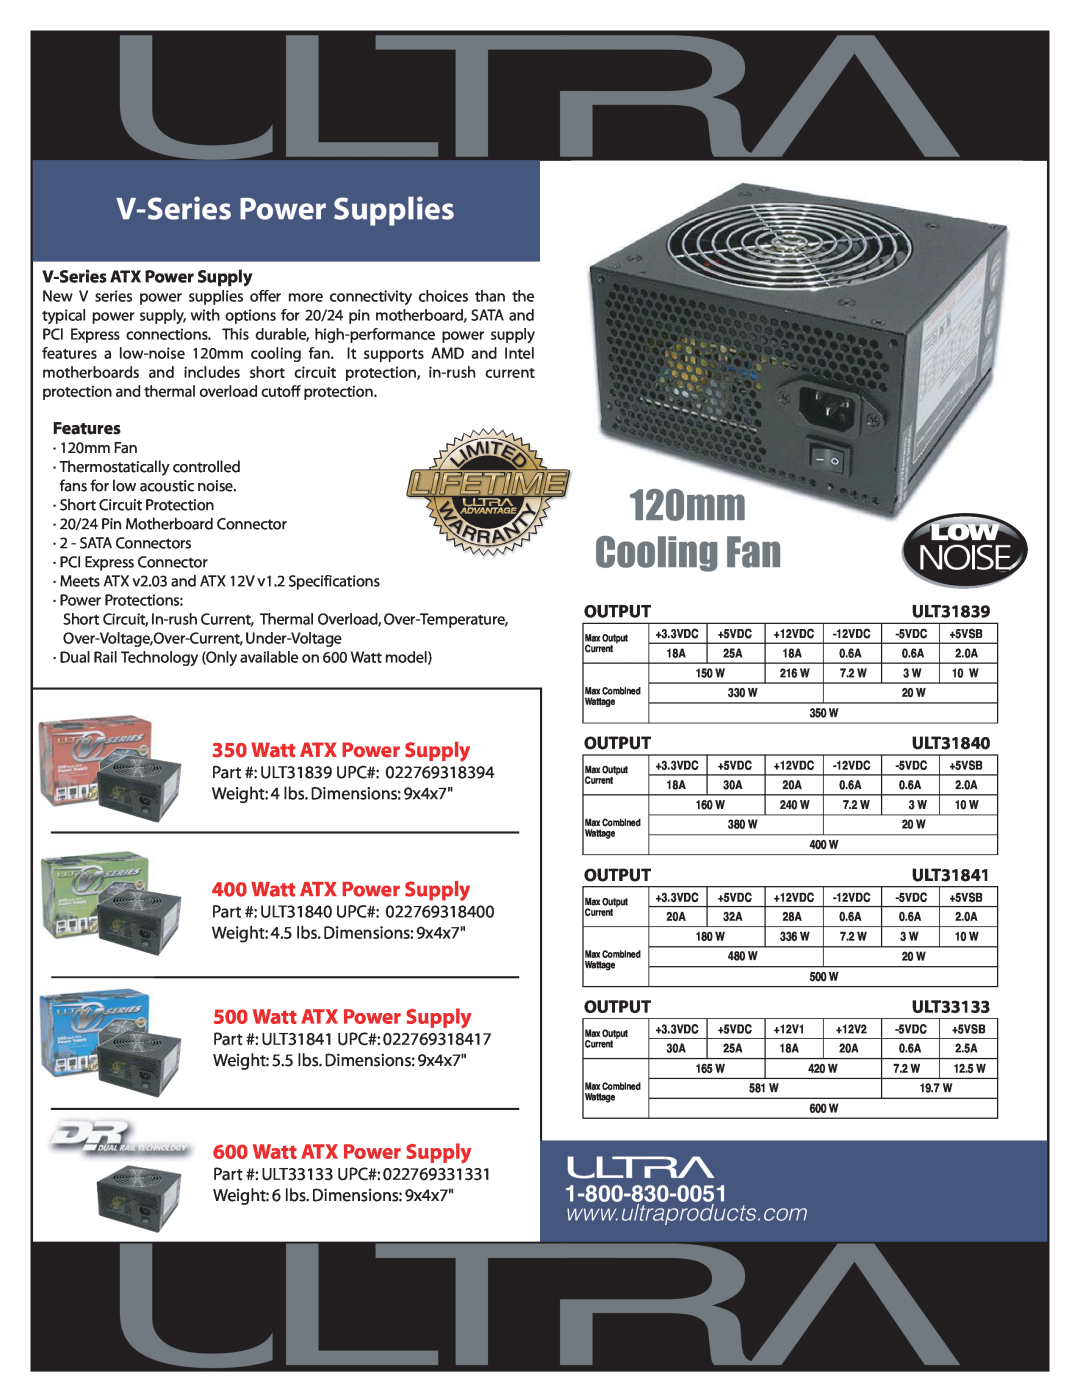 Ultra Products dimensions 120mm Cooling Fan, V-Series Power Supplies, Watt ATX Power Supply, V-Series ATX Power Supply 